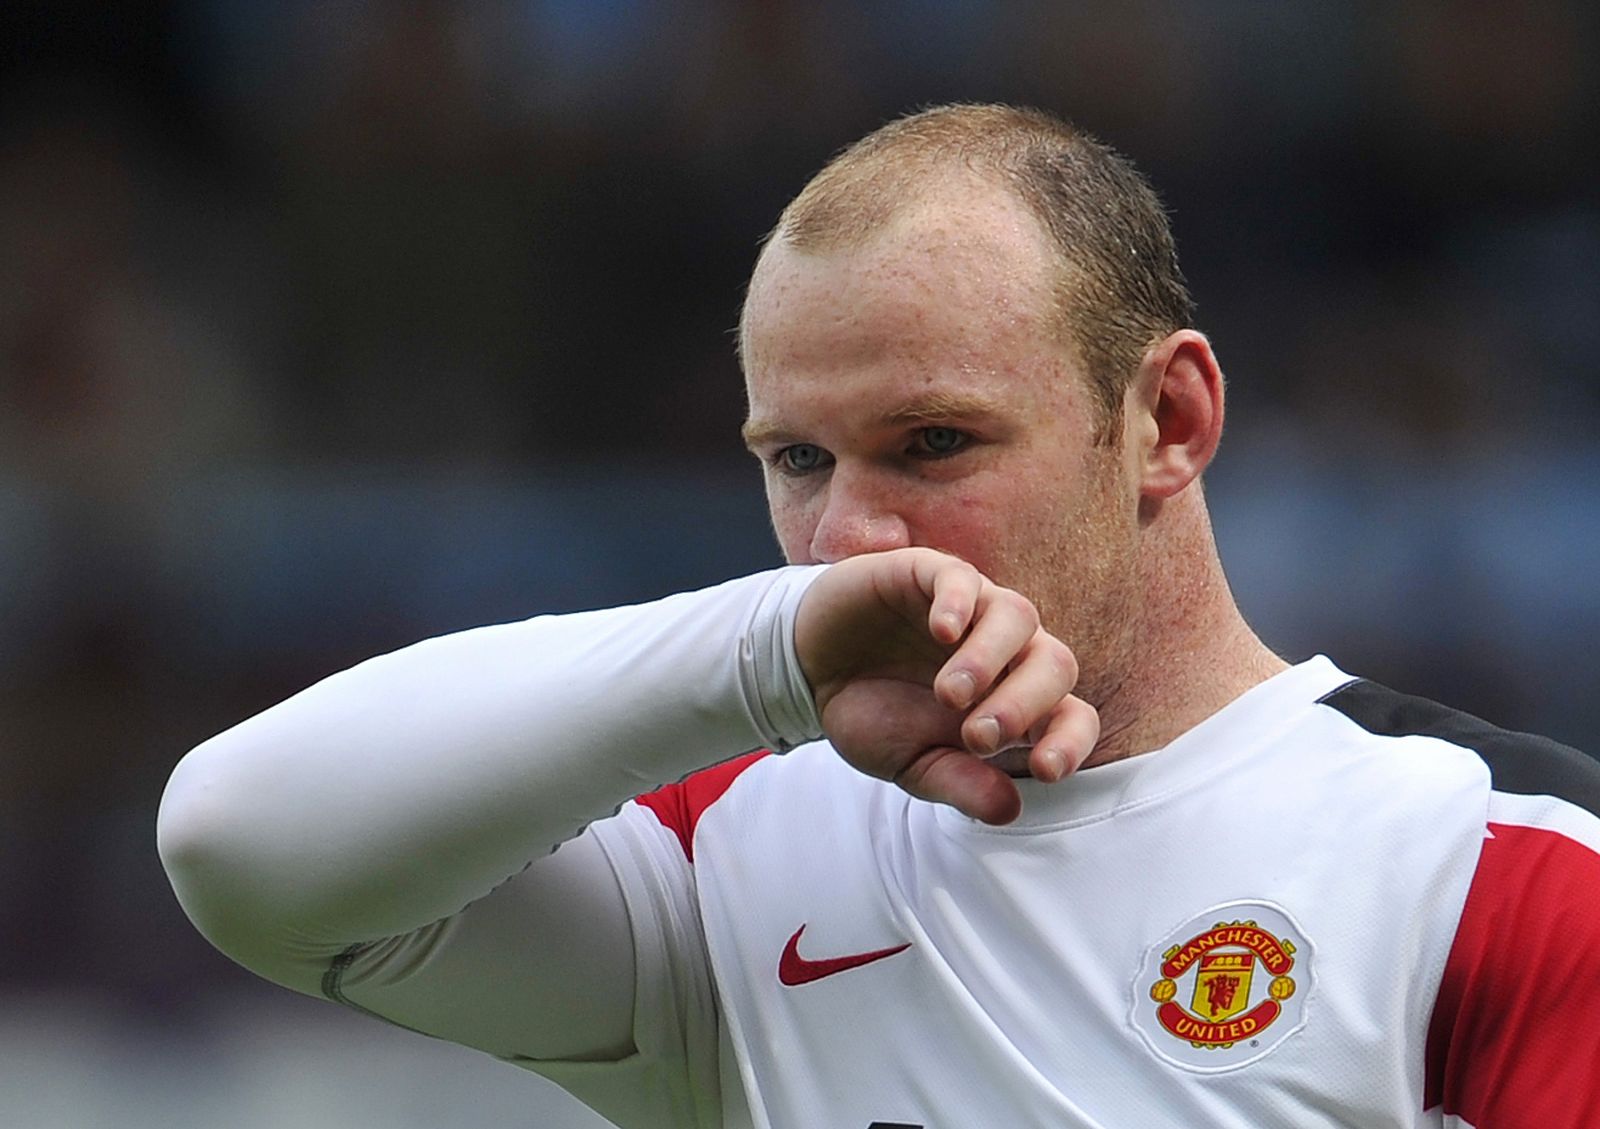 Manchester United's Rooney reacts during their English Premier League soccer match against West Ham in London